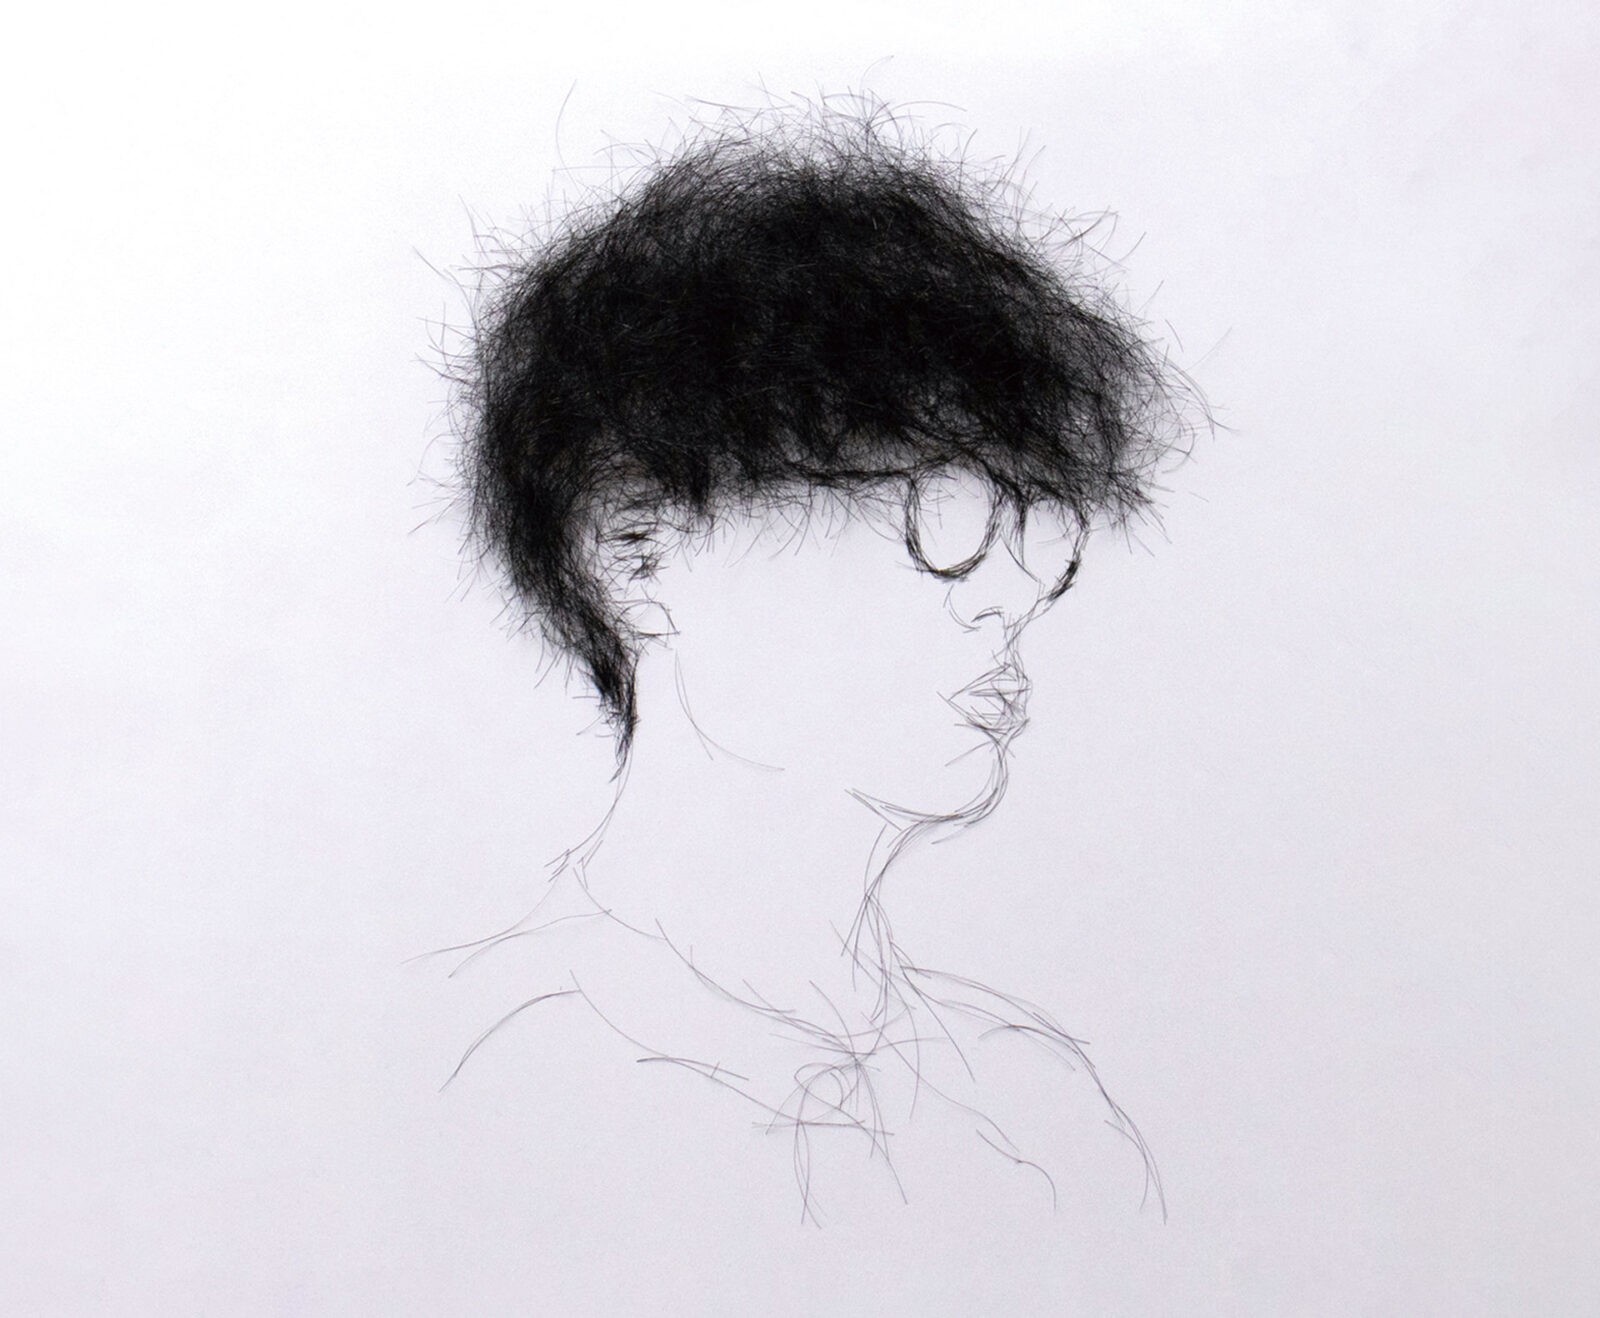 『drawing with a hair』久保川亮 技法・素材：髪の毛